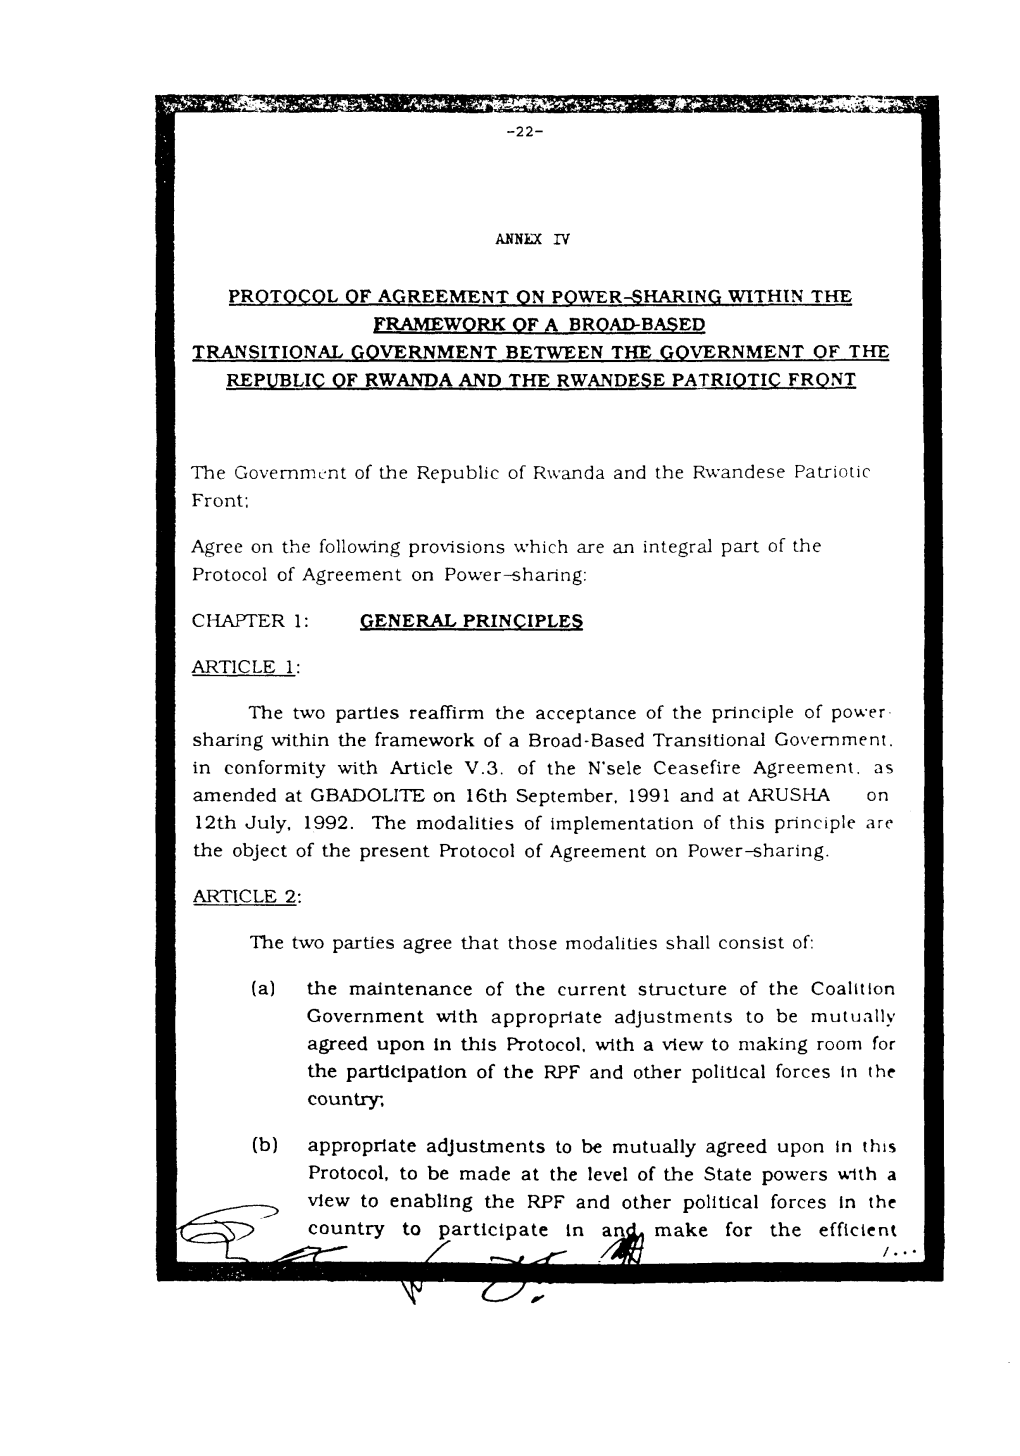 Protocol of Agreement on Power-Sharing